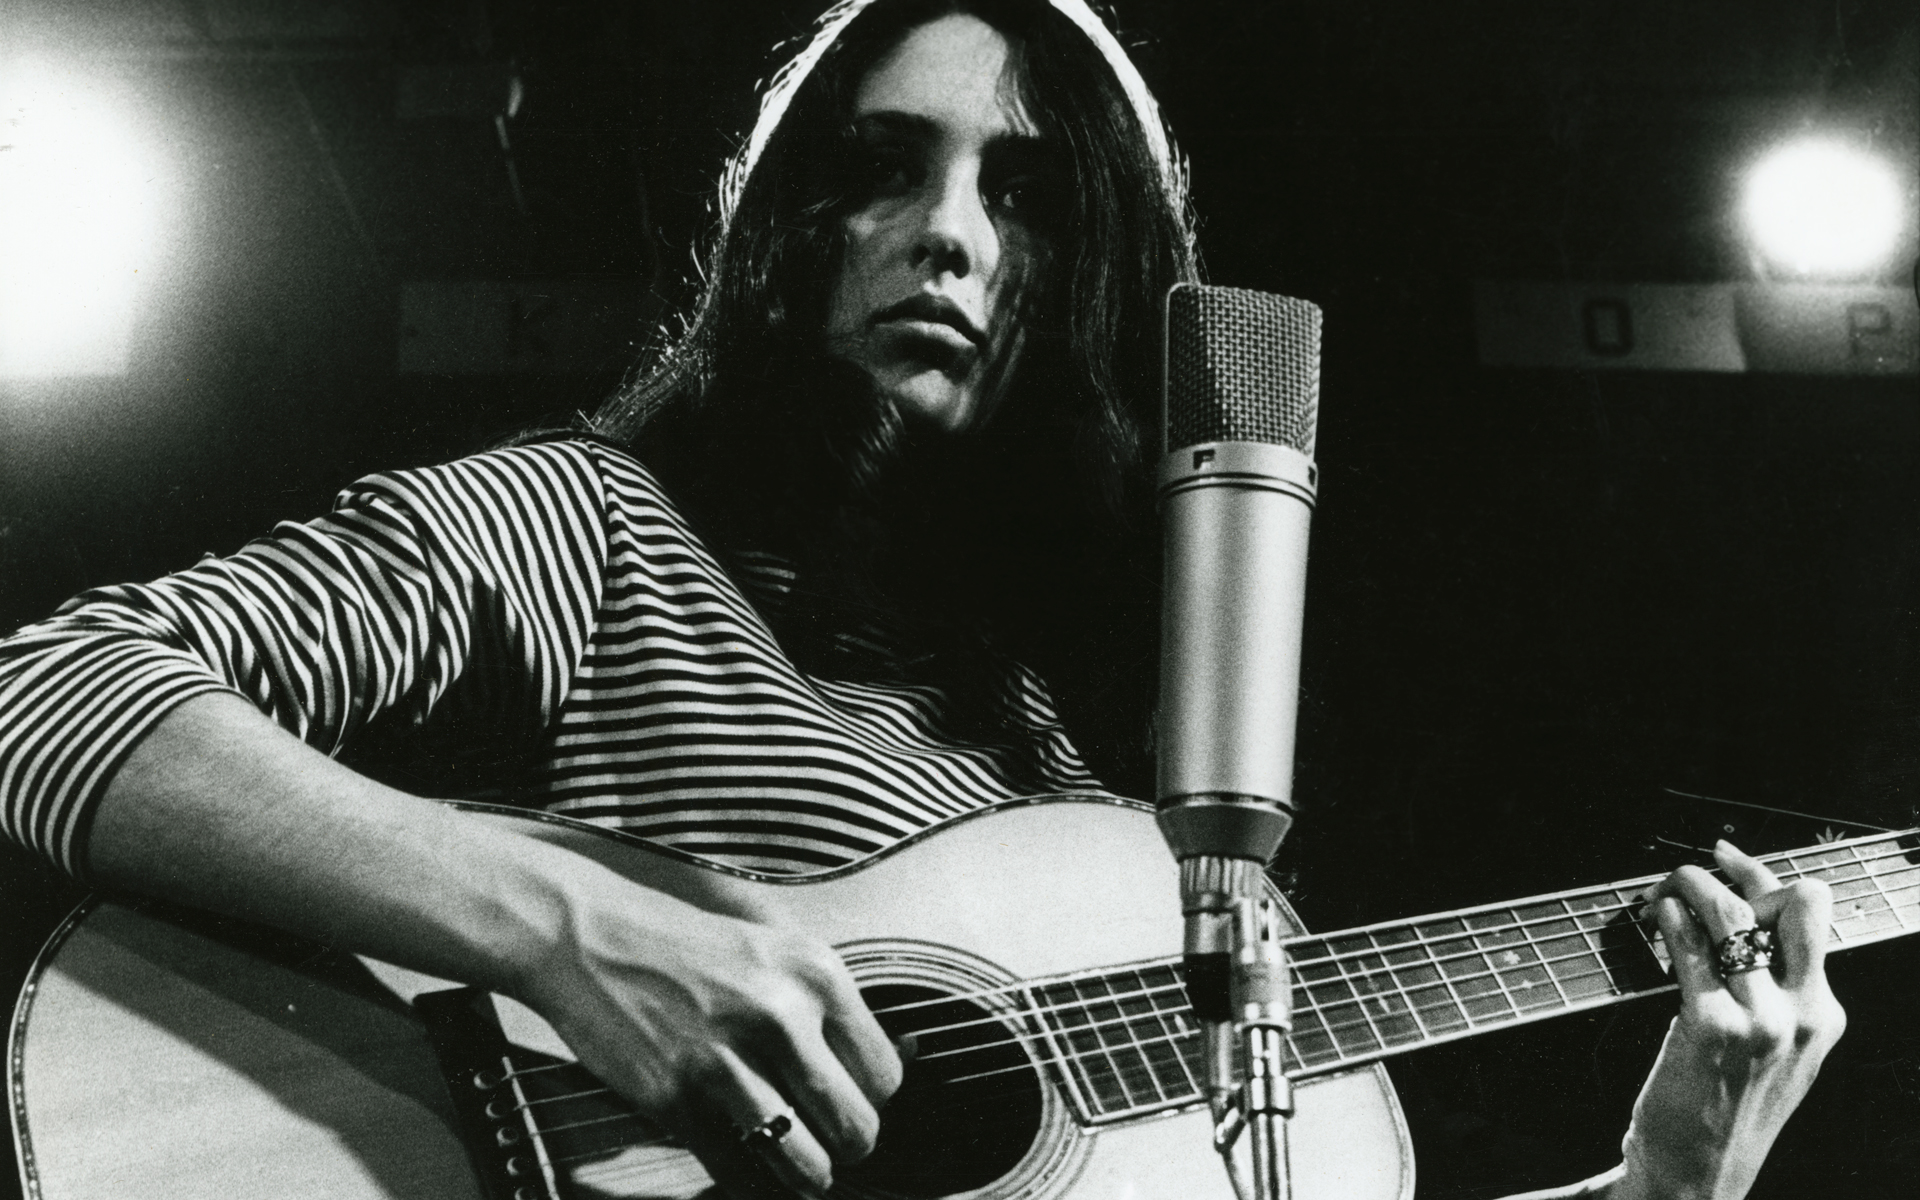 Black-and-white photo of woman in striped shirt playing guitar in front of mic